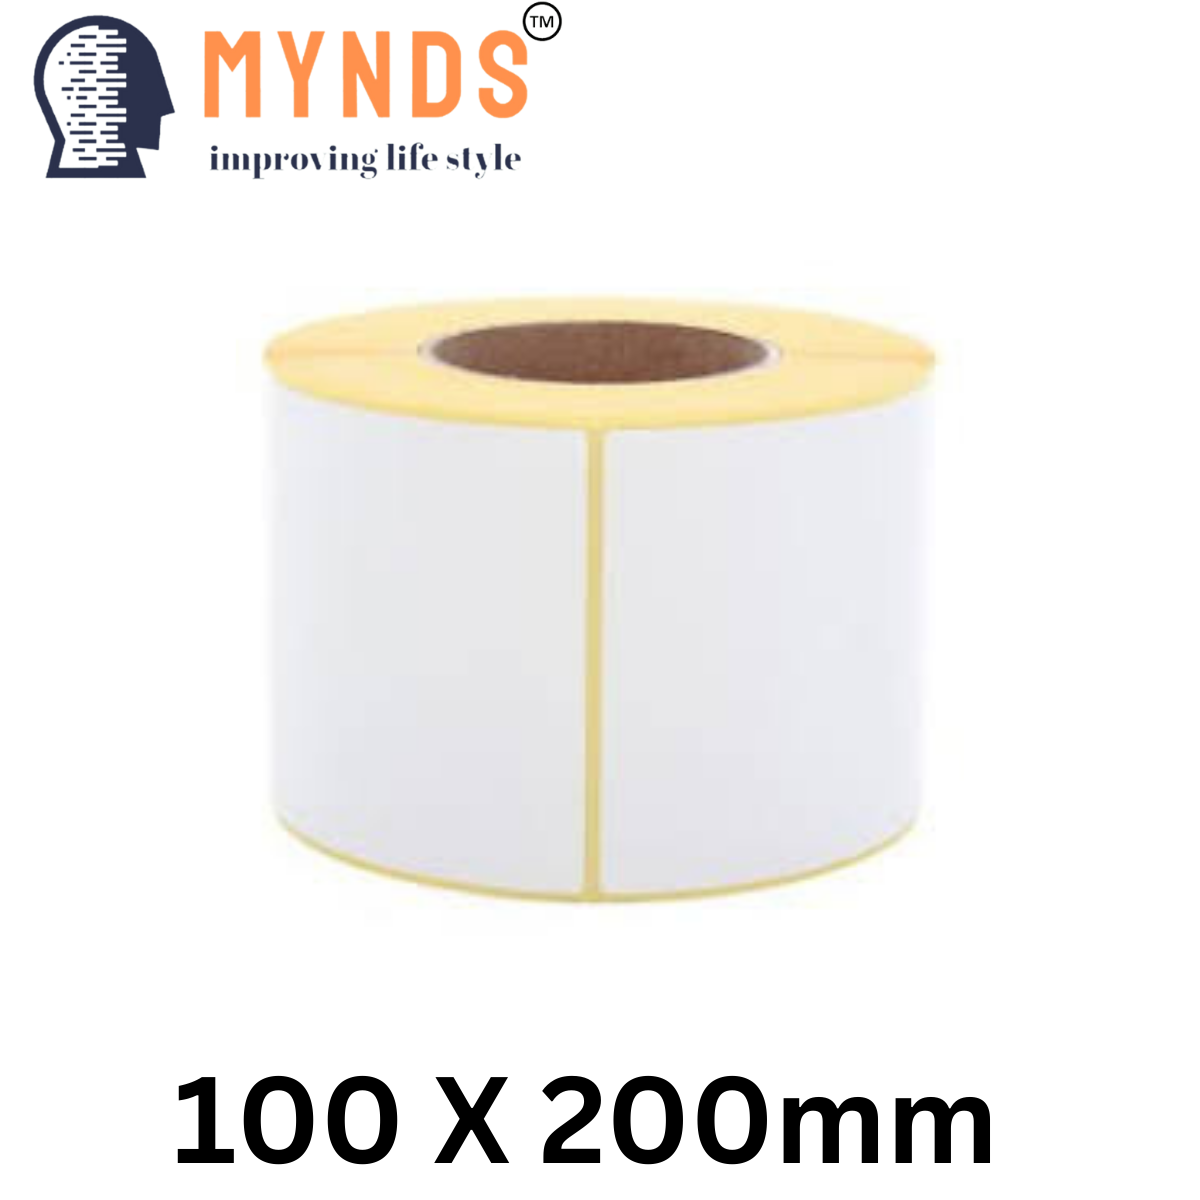 100 X 200mm Direct Thermal Labels by MYNDS